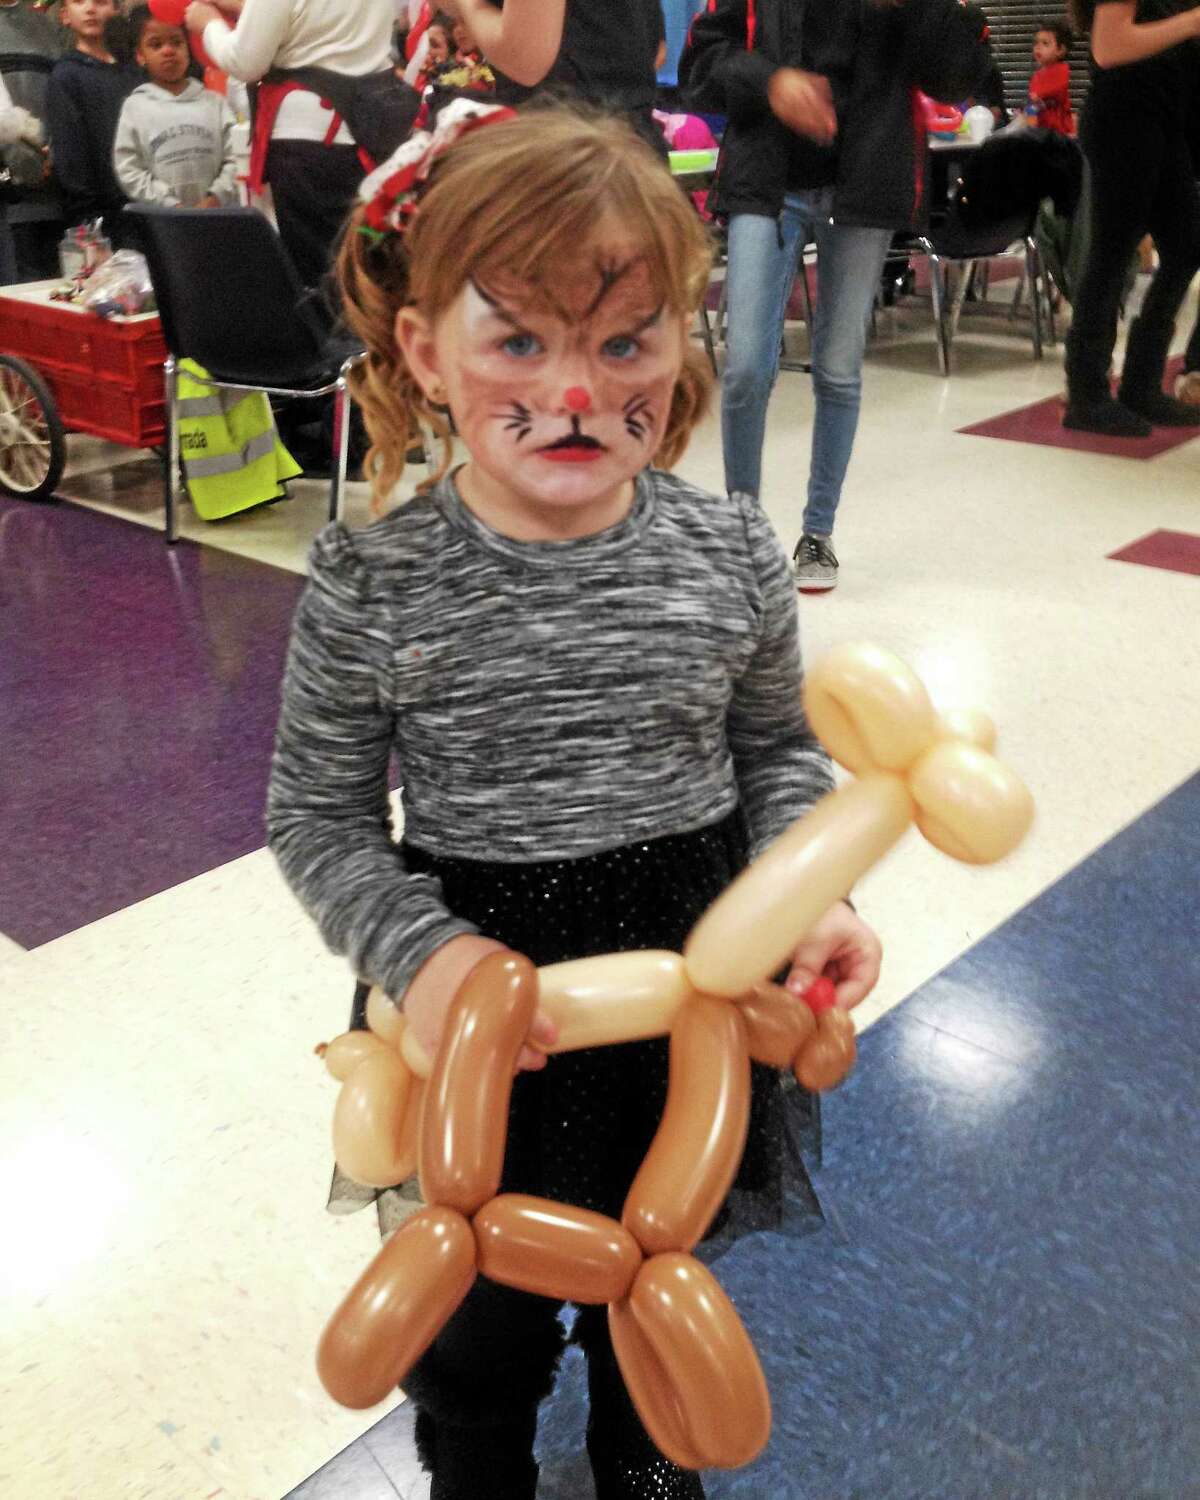 Children of all ages enjoyed watching — and receiving — their very own balloon creations courtesy of Noodles at the holiday party organized by Cromwell Youth Services staff and Cromwell High School Student Council members.